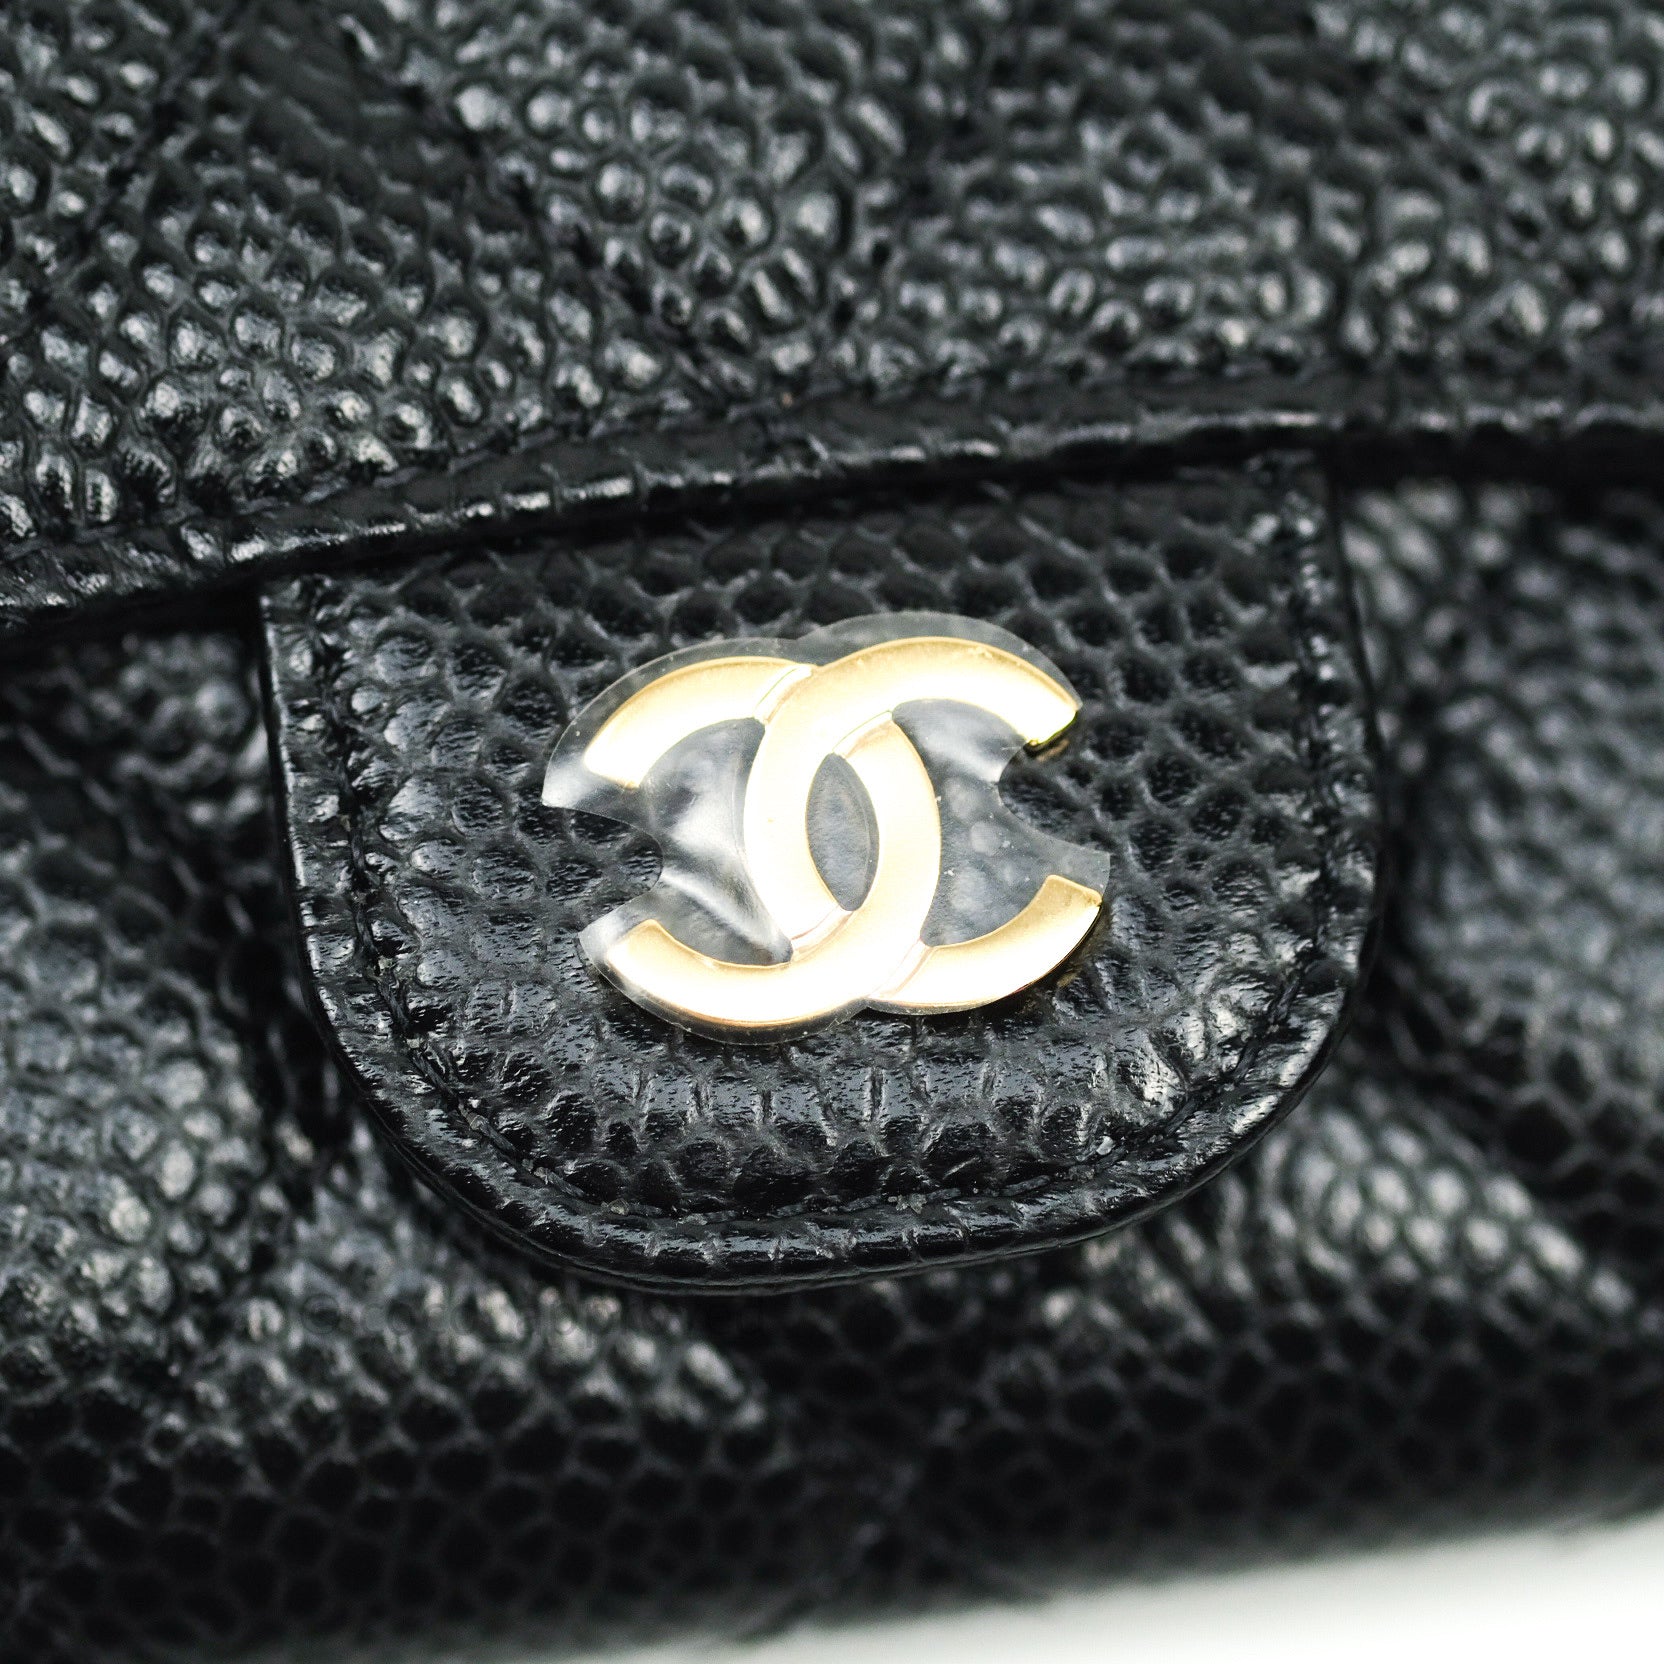 Chanel Pre Owned Boy Black Caviar Quilted Leather Zip Around